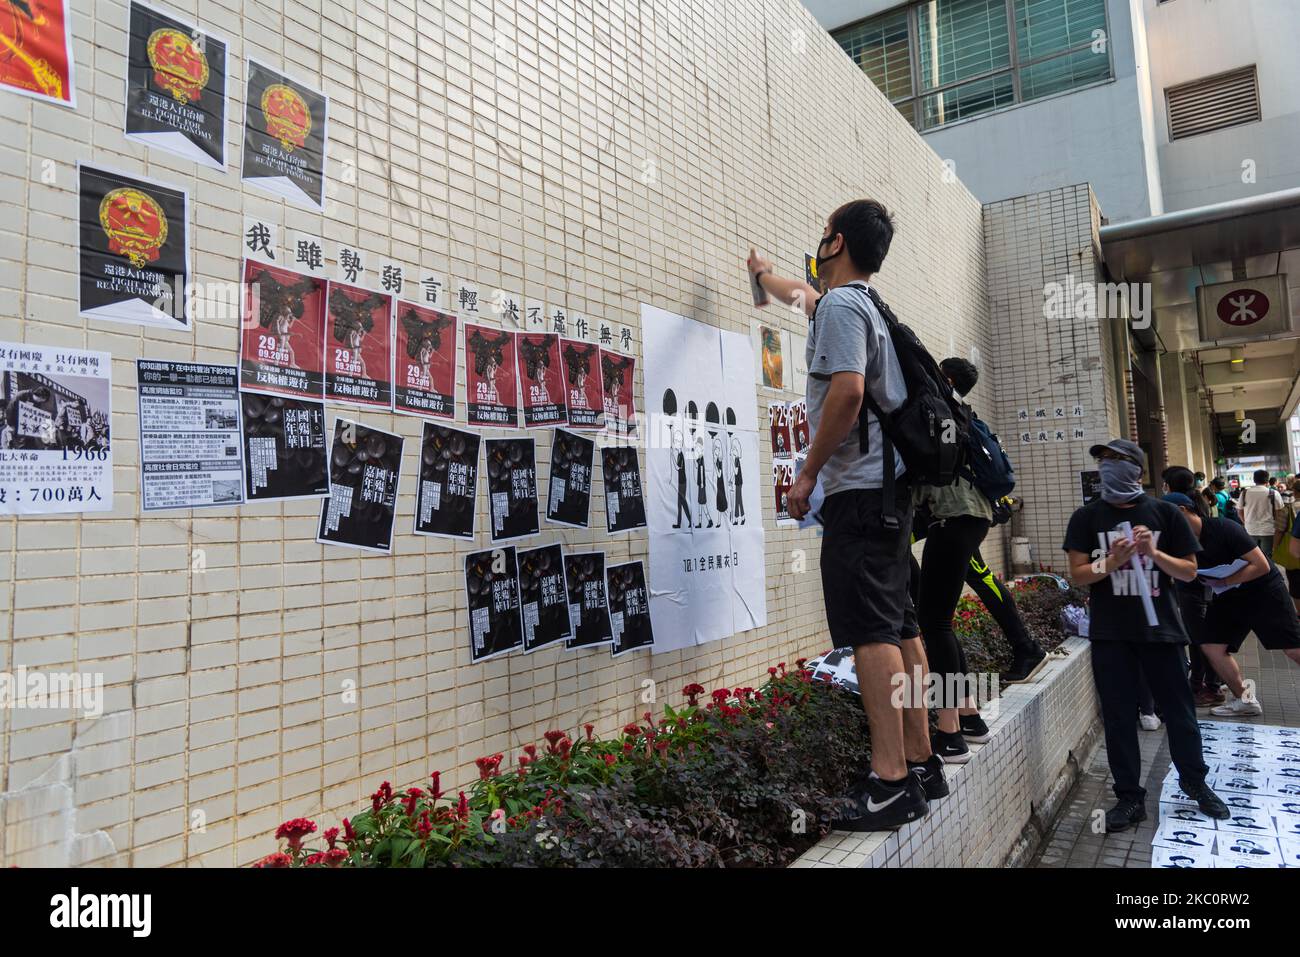 Protesters stick posters on a wall in Wanchai, Hong Kong, China, on 28 Sep 2019. (Photo by Marc Fernandes/NurPhoto) Stock Photo